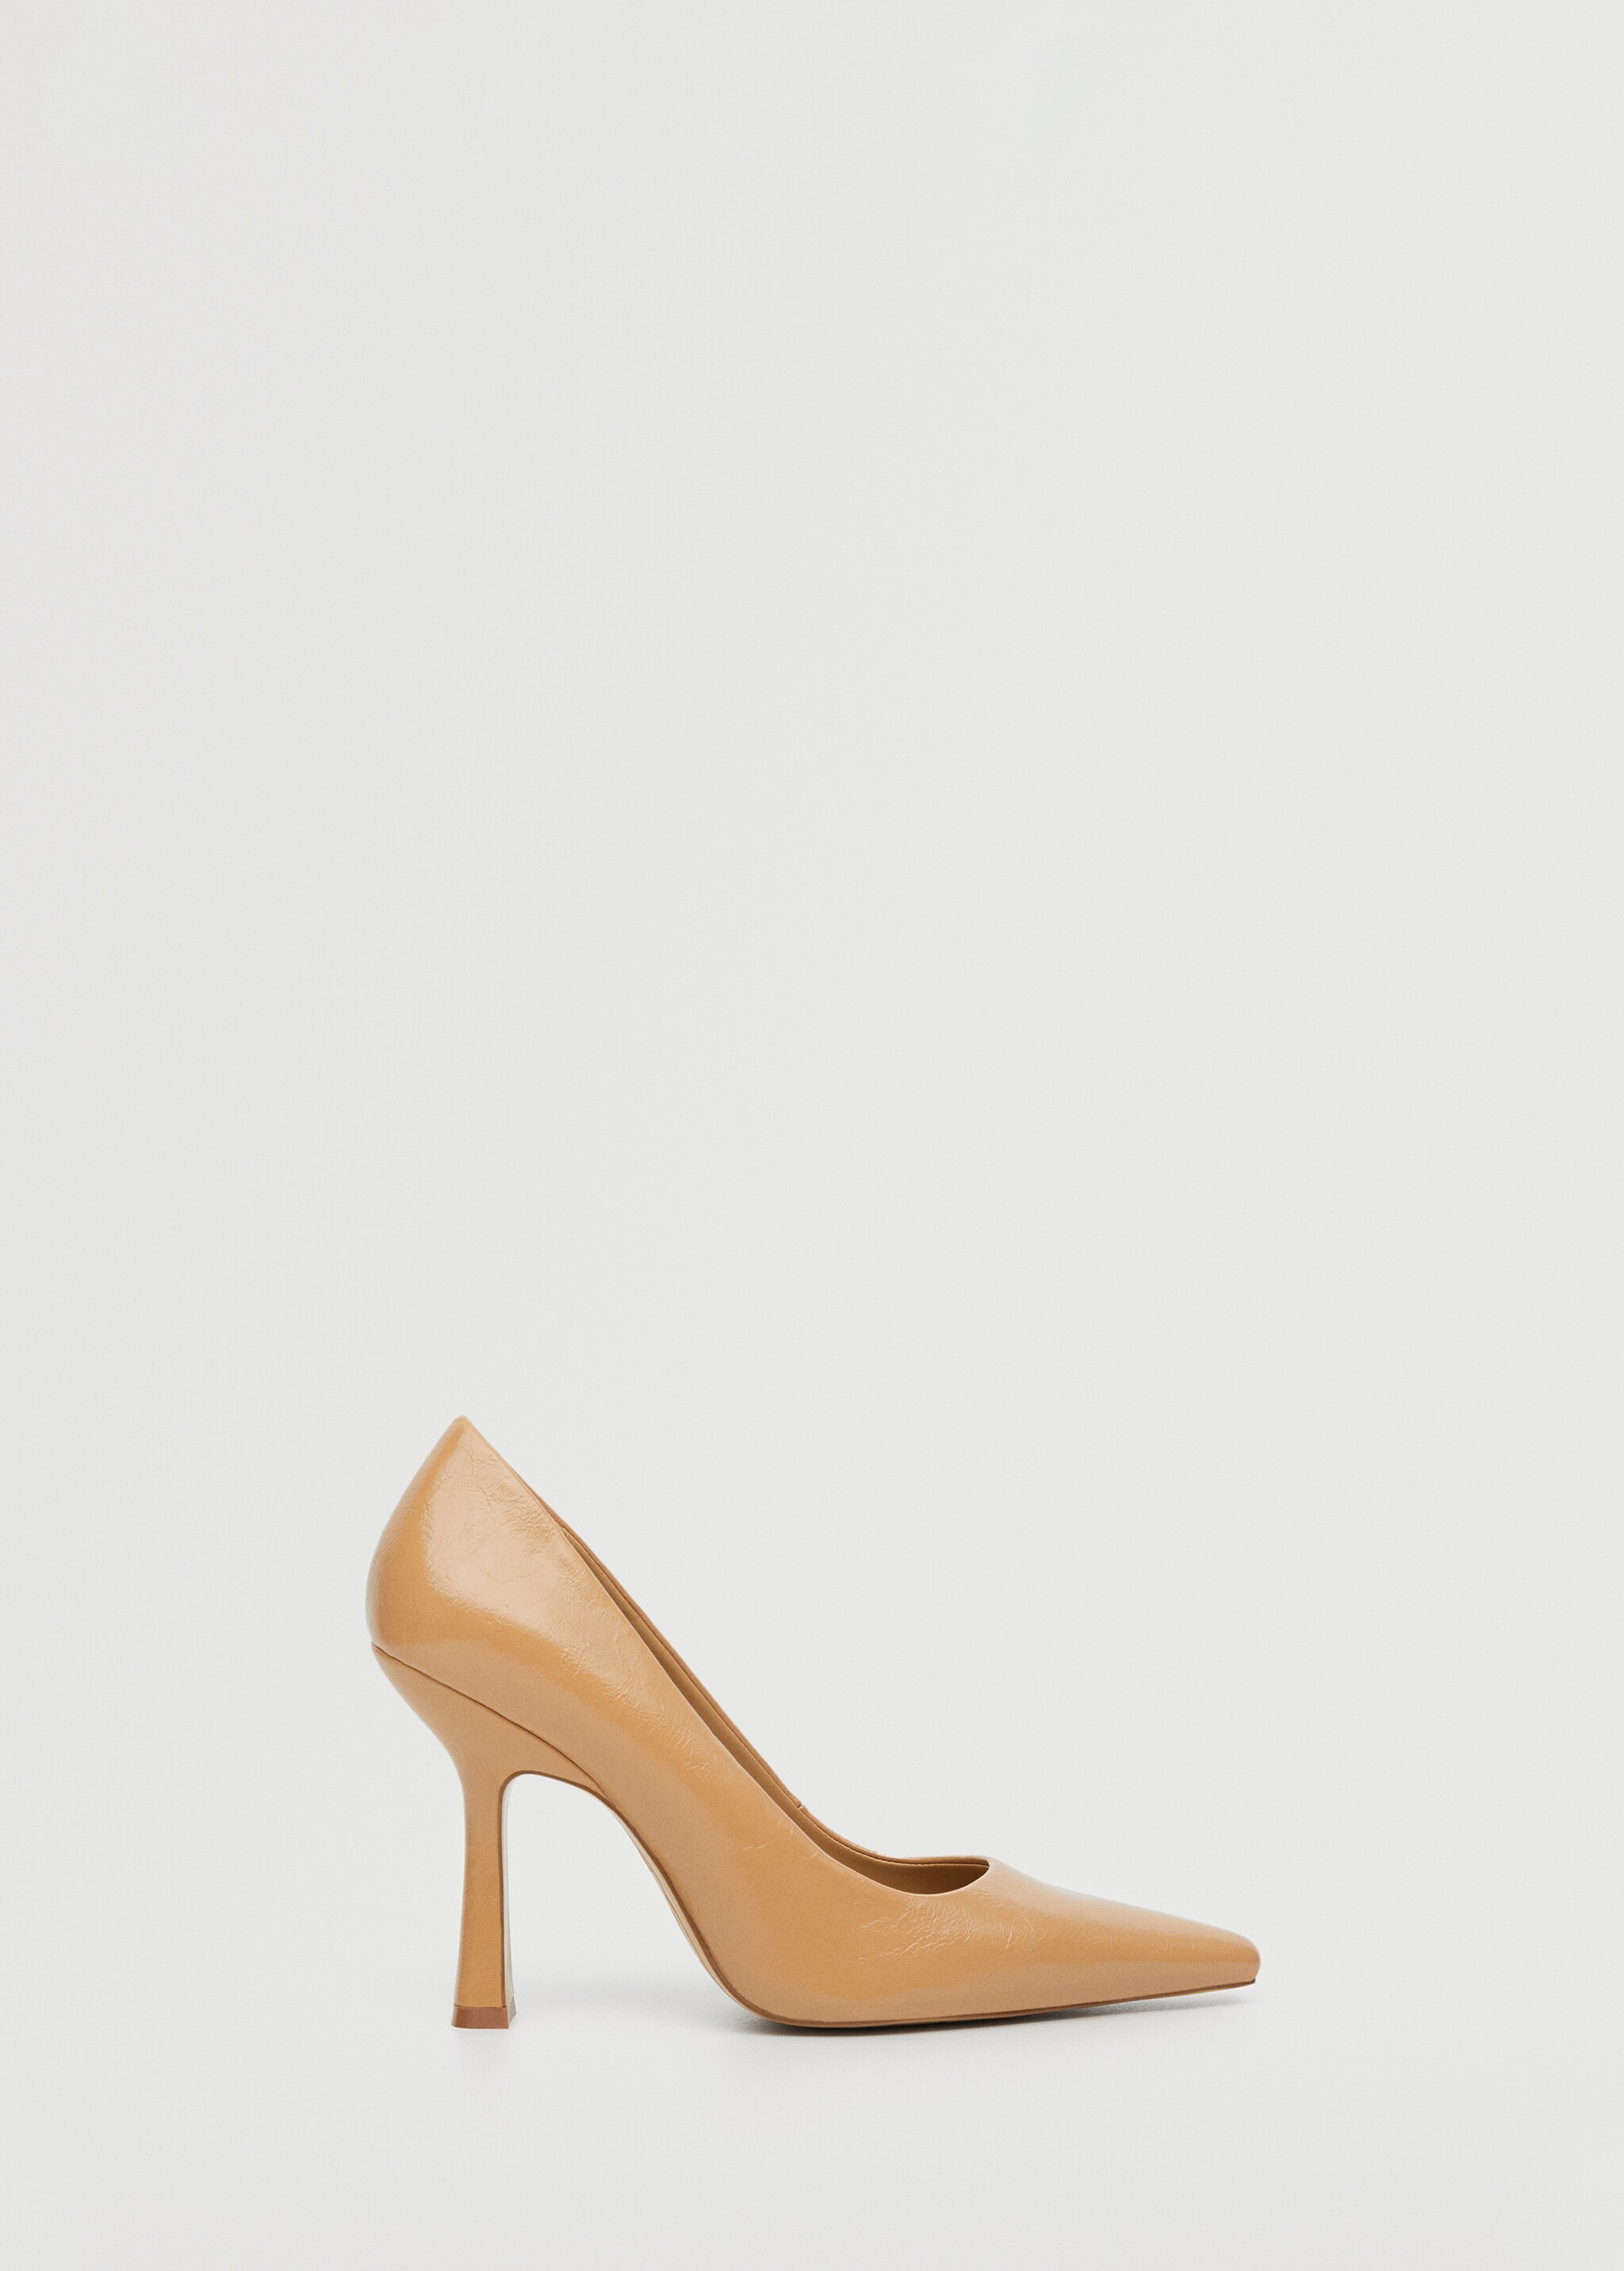 Pointed toe pumps - Article without model